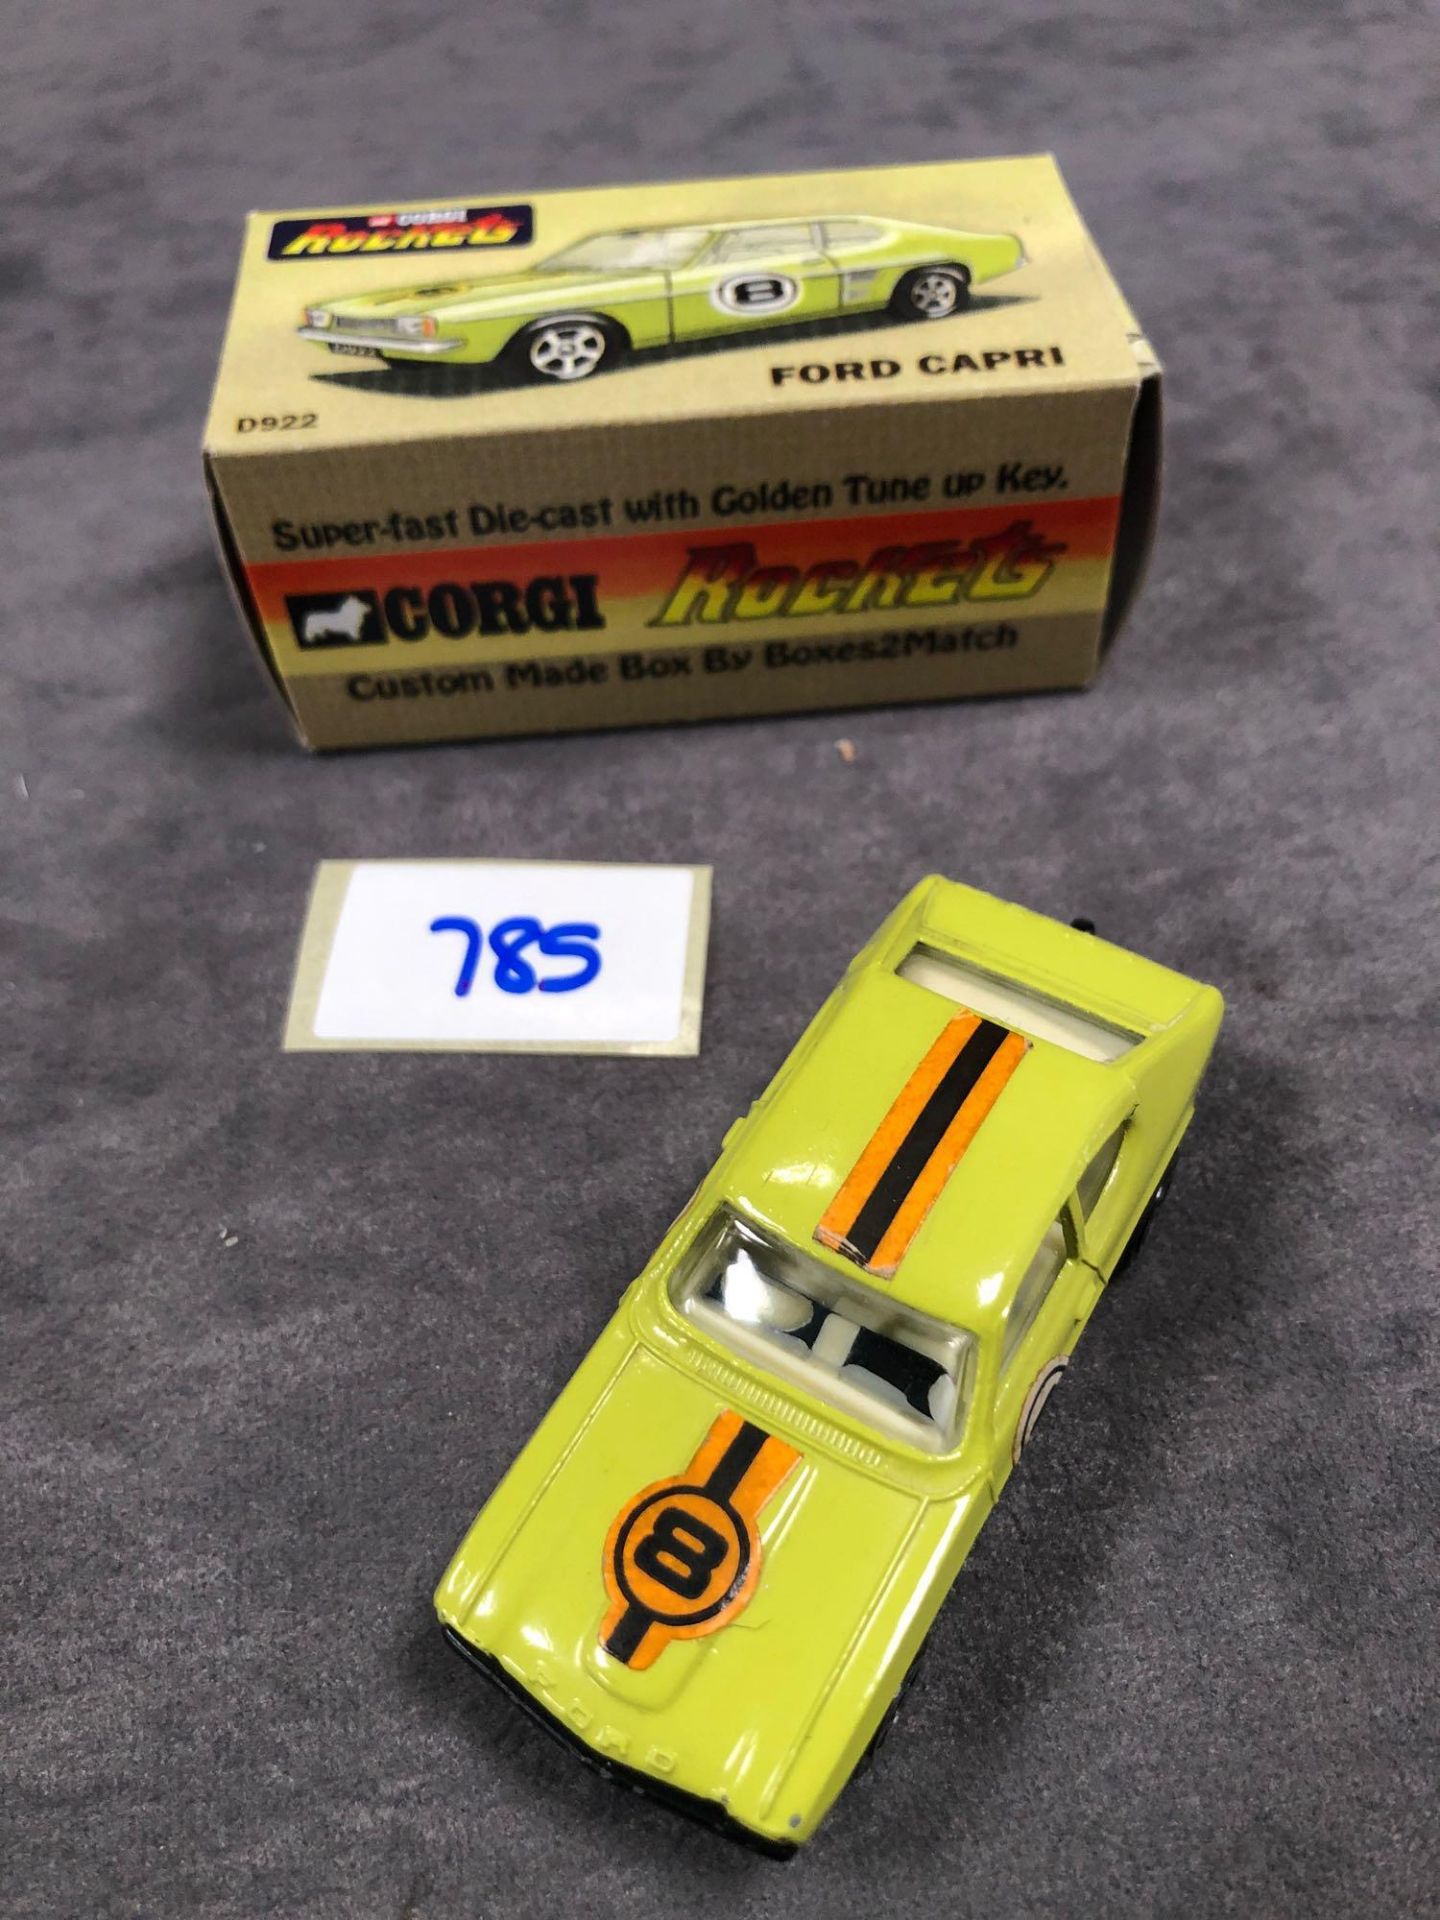 No Decal Mint Corgi Rockets Diecast #D922 Ford Capri In Lime Green In 'Code 2' Manufactured Box